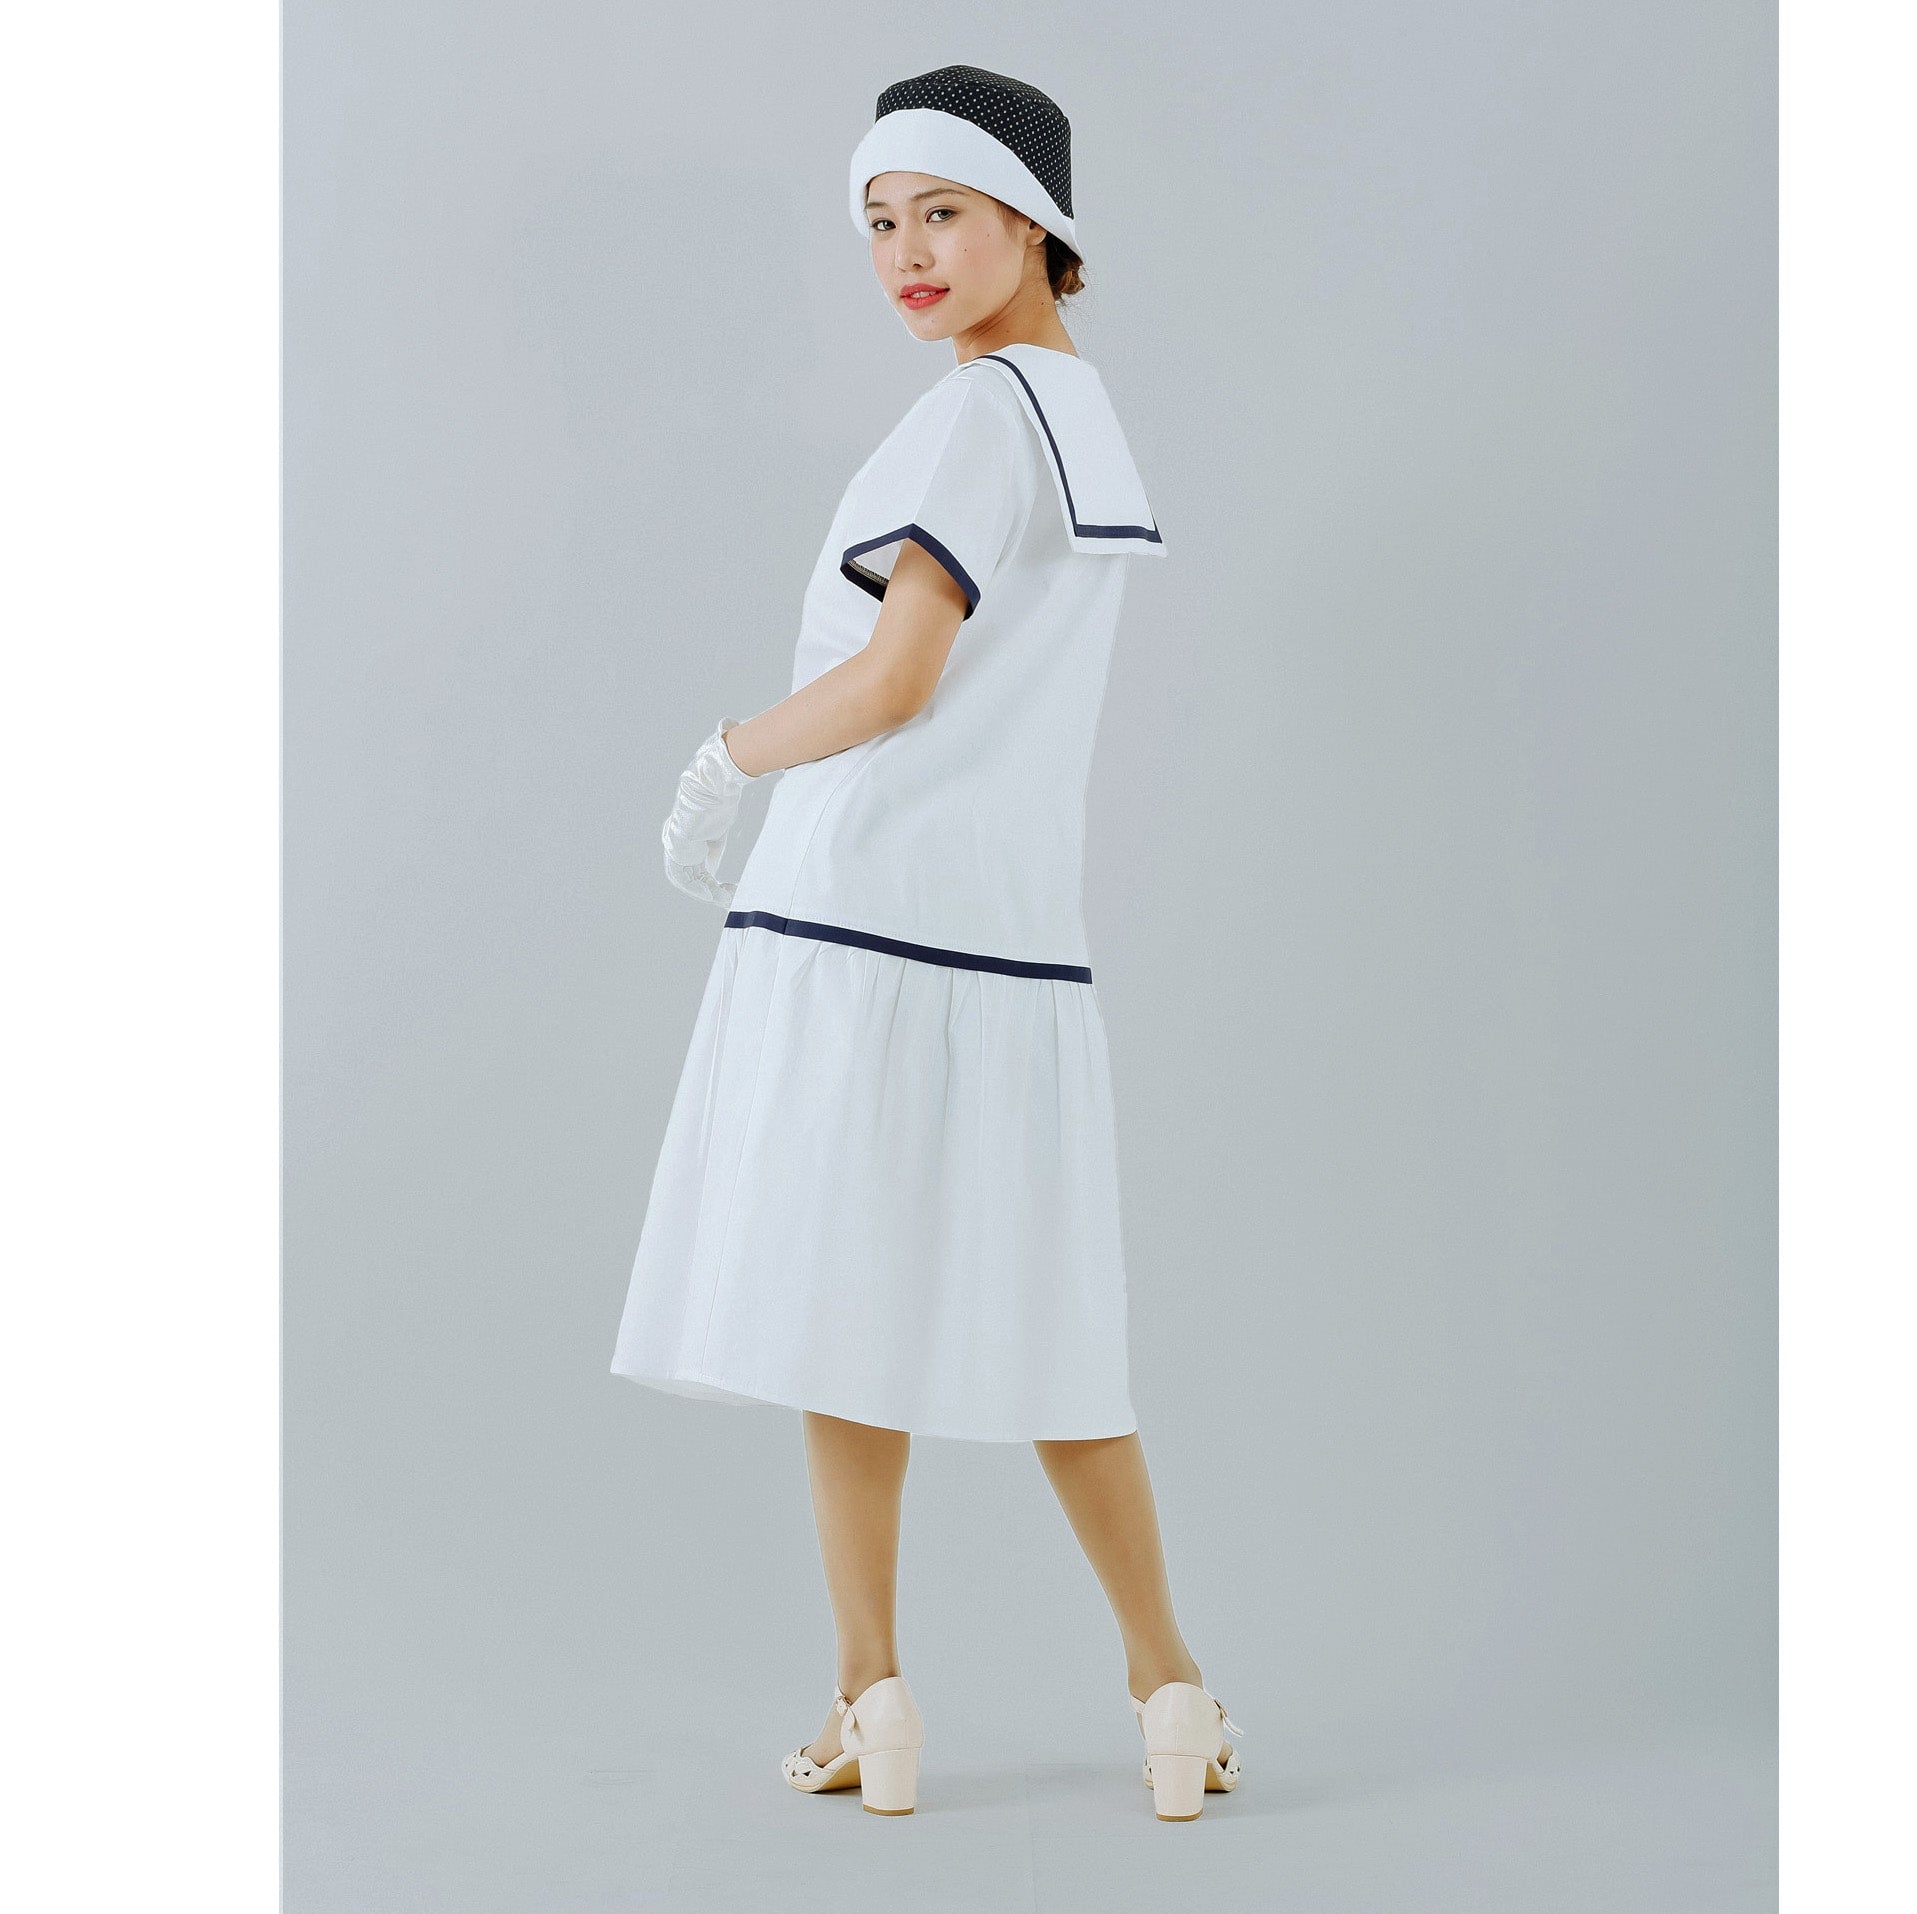 Nautical dress made of pure white and navy-blue cotton poplin. The 1920s dress can be worn as a roaring twenties tea dress or a Great Gatsby party dress.